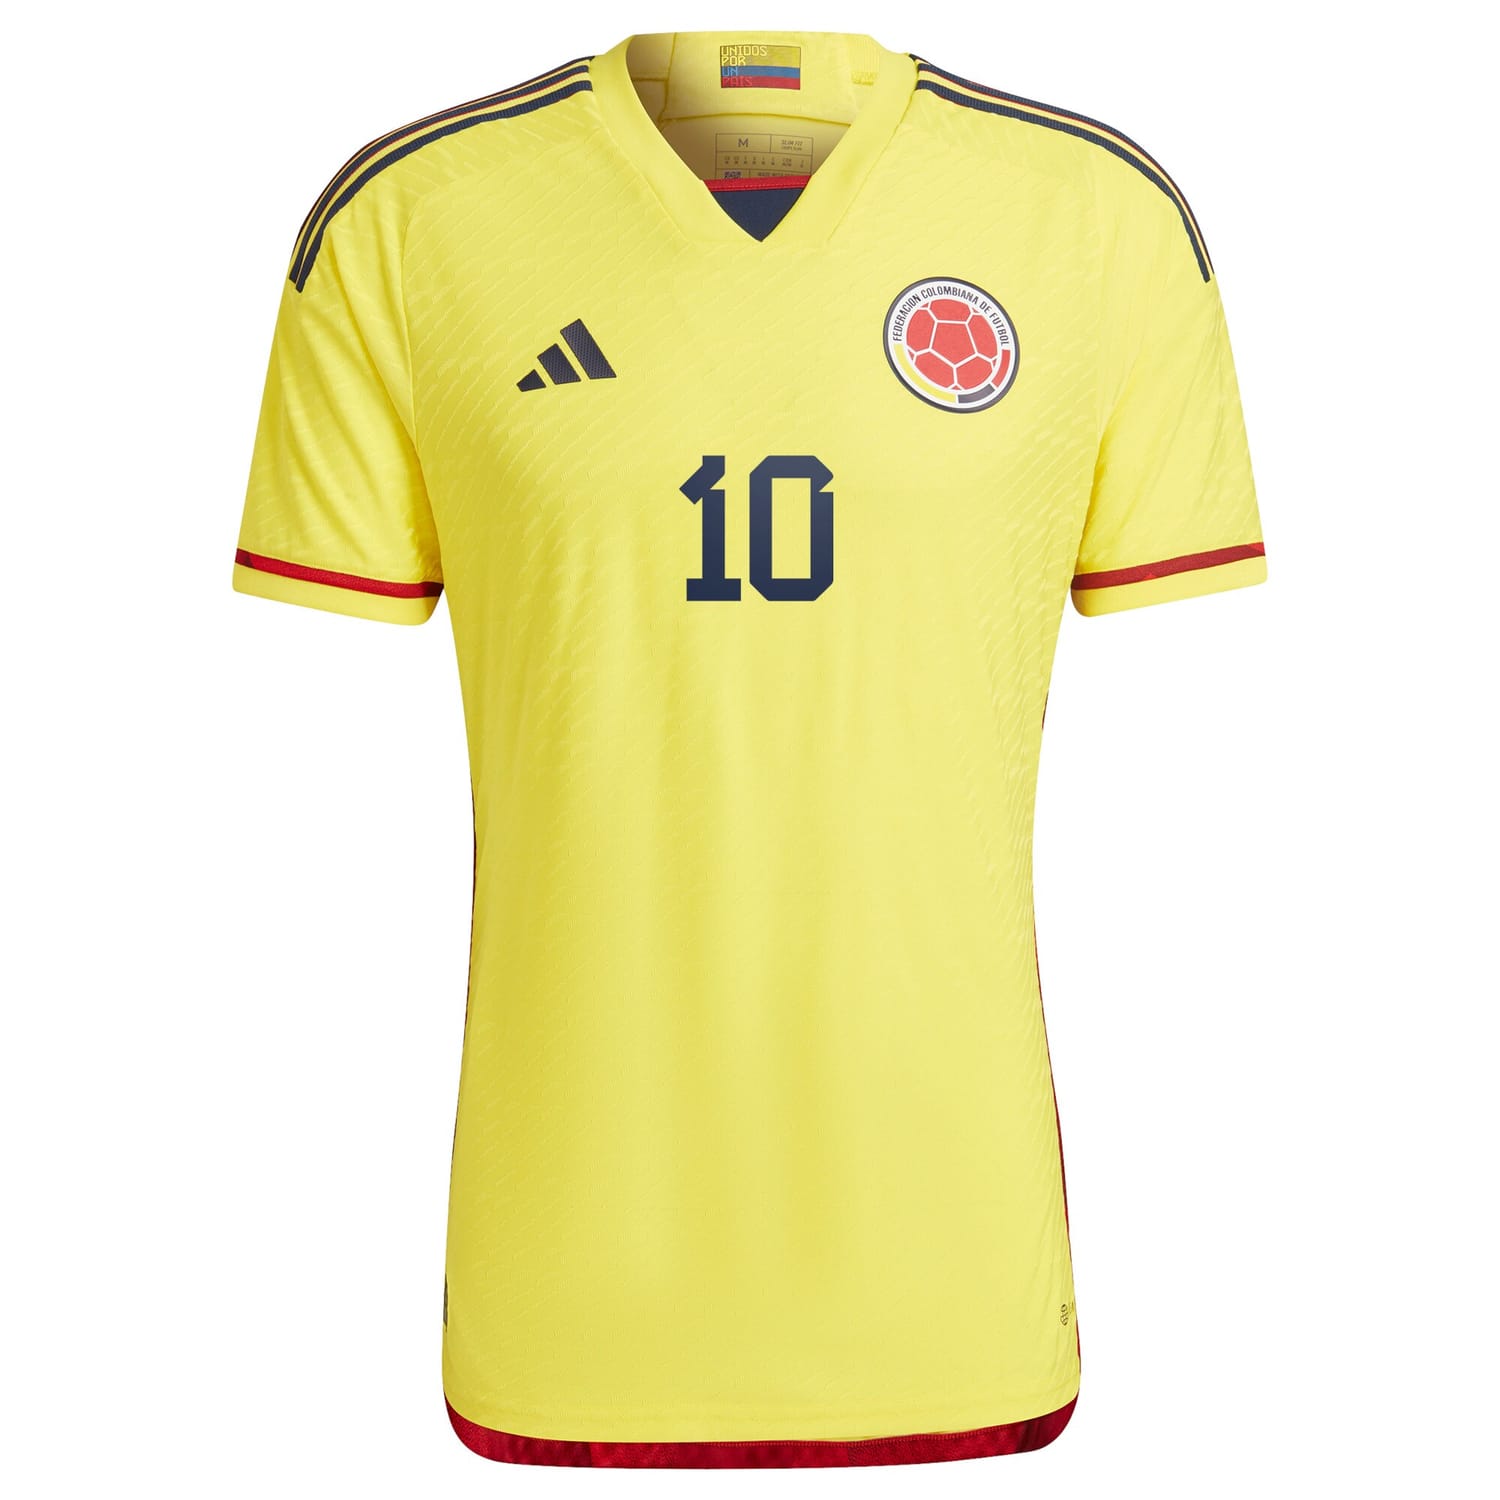 Colombia National Team Home Authentic Jersey Shirt Yellow 2022-23 player James Rodriguez printing for Men